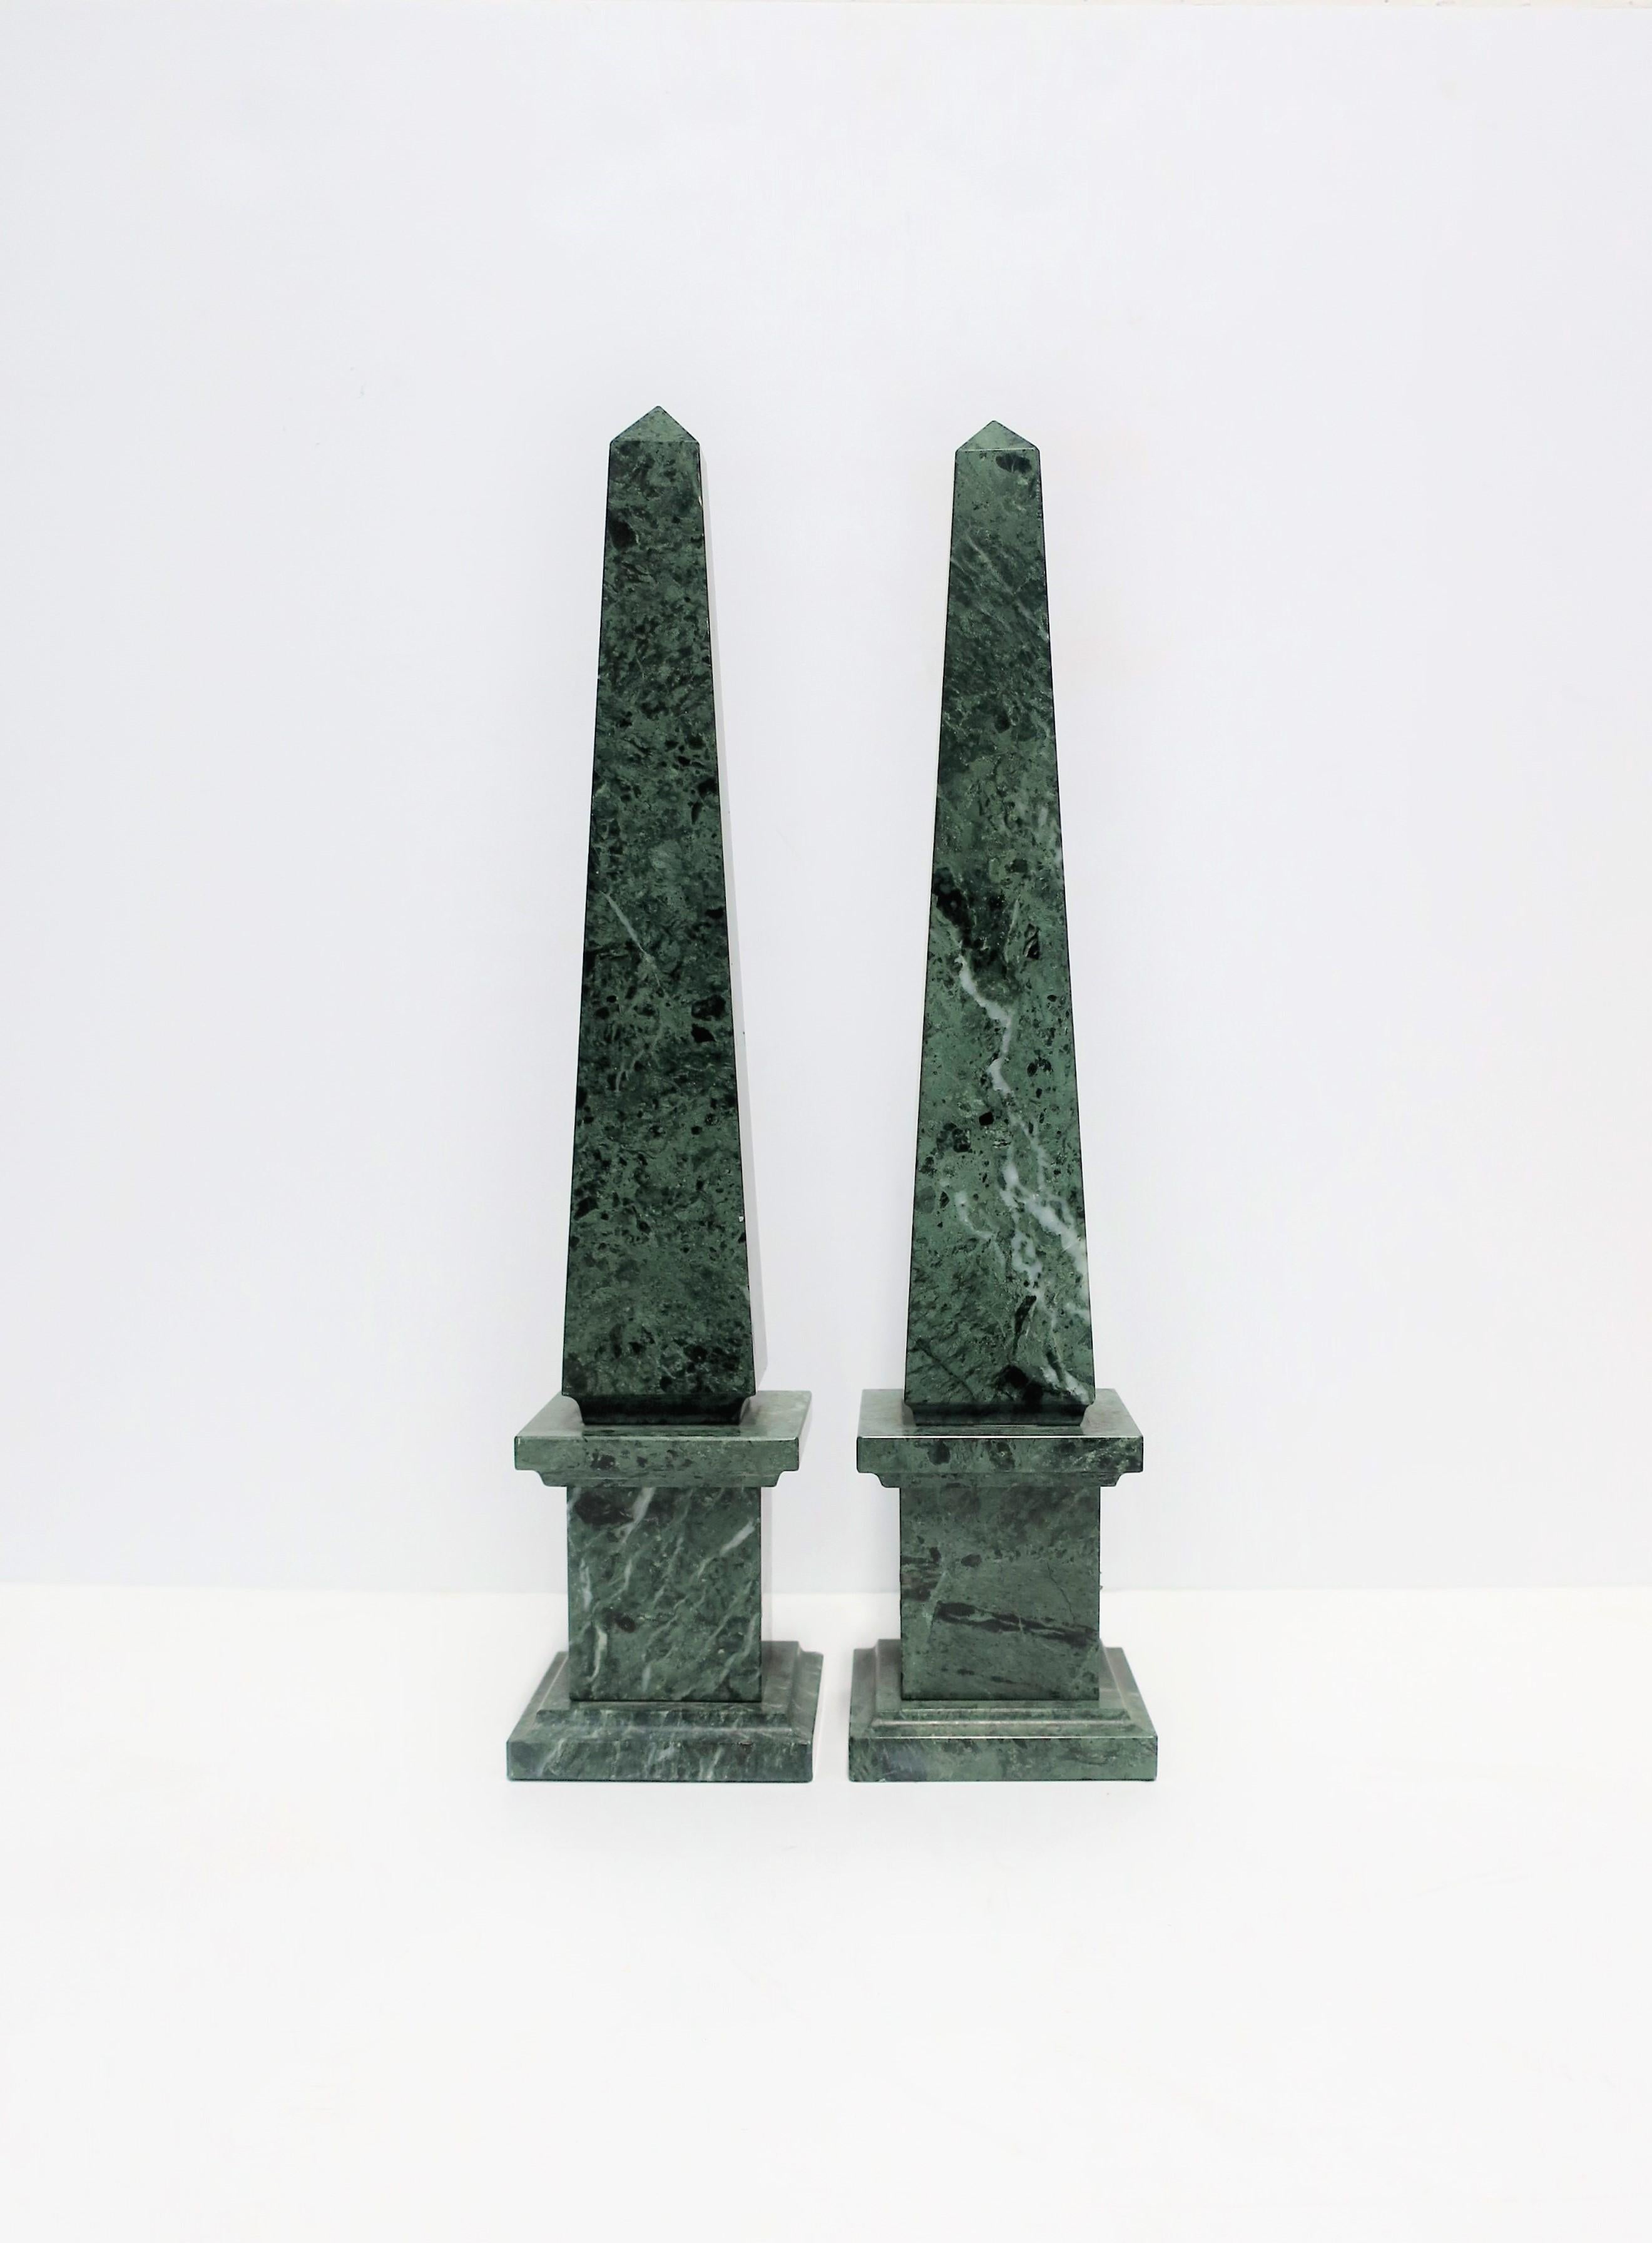 A beautiful and substantial pair of modern Italian green, black, and white, marble obelisks, circa mid - late 20th century, Italy.

Measurements: 3